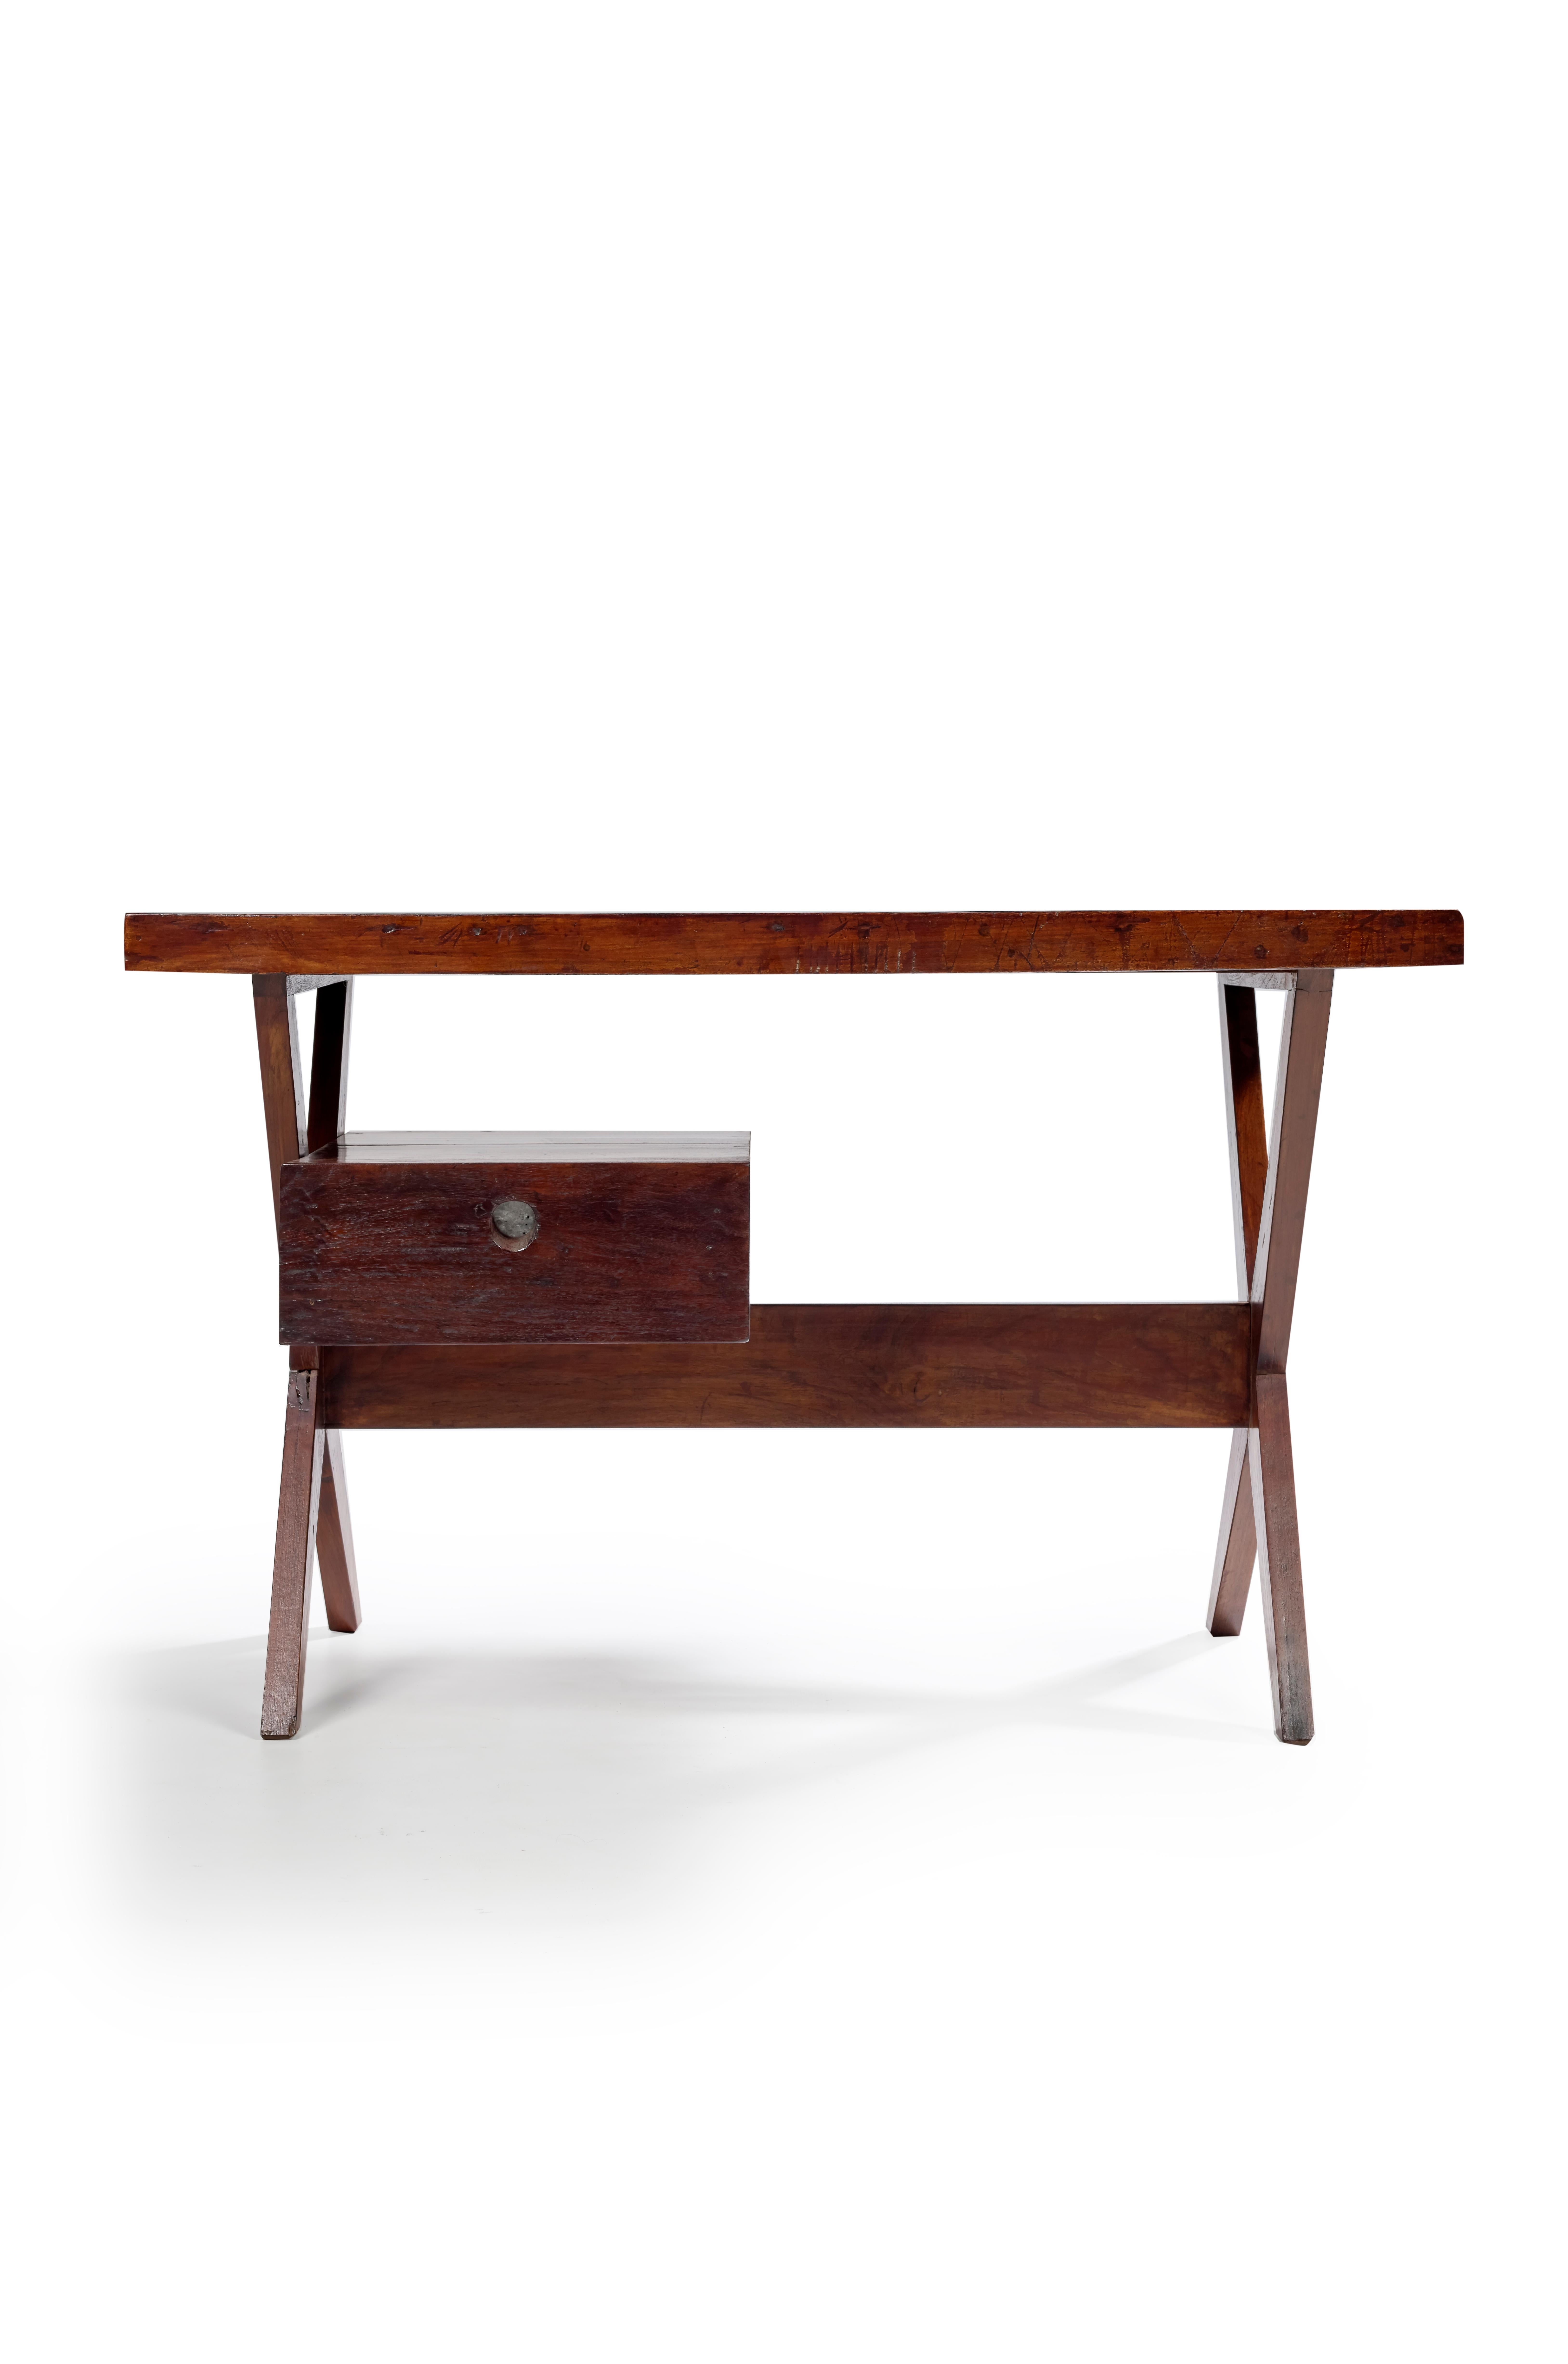 Pierre Jeanneret PJ-SI-33-B, circa 1960
Desk
Solid and plywood teak.
Provenance : Chandigarh, India.

Important: Vintage collector's item for sale with guaranteed authenticity.